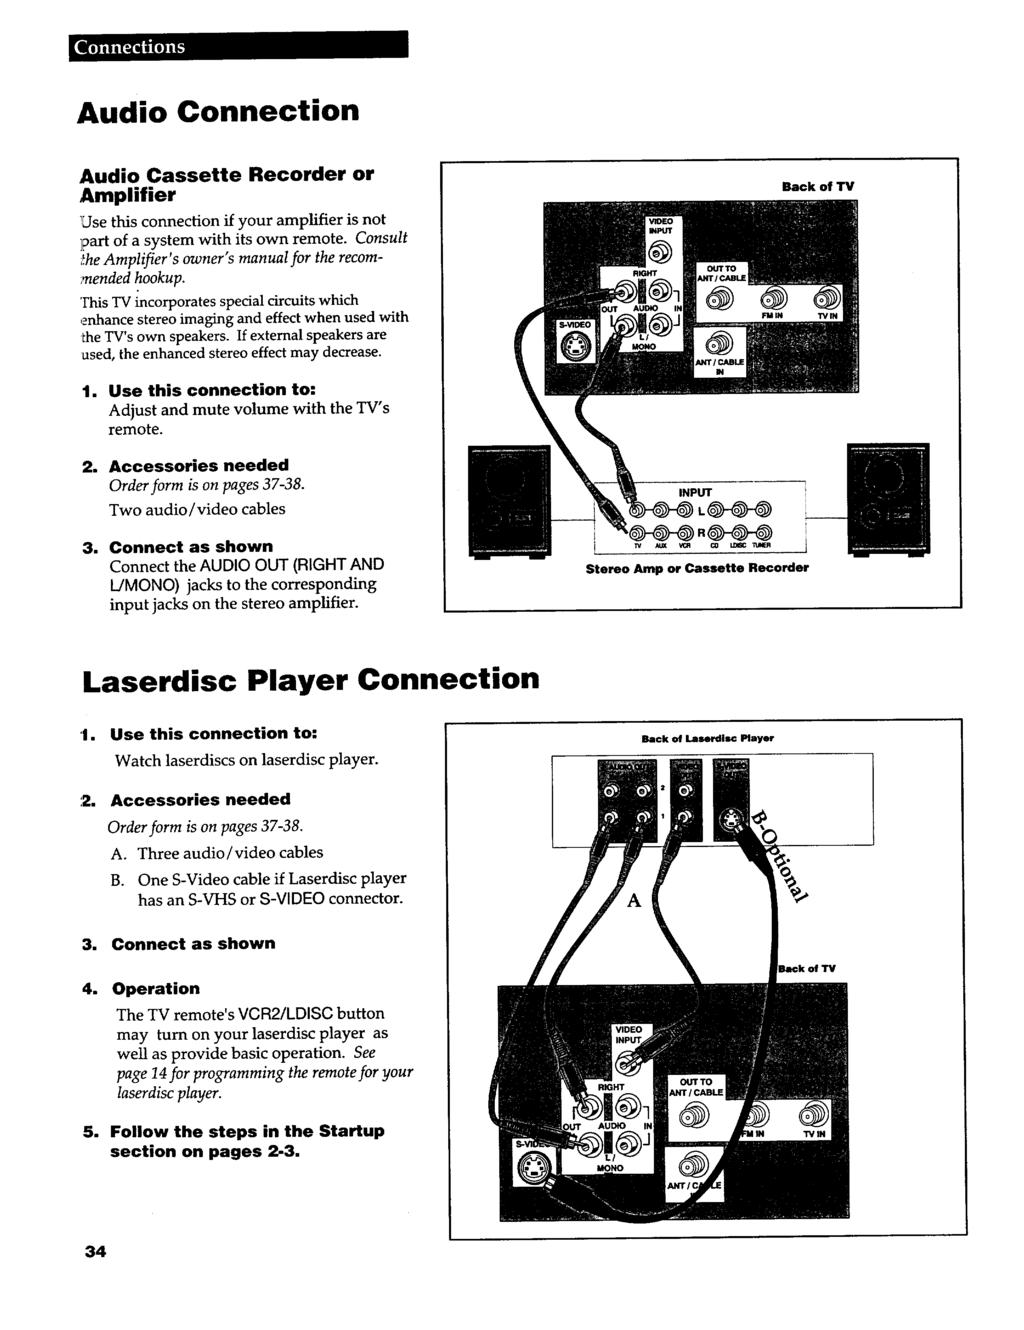 Audio Connection Audio Cassette Recorder or Amplifier!Use this connection if your amplifier is not part of a system with its own remote. Consult _!